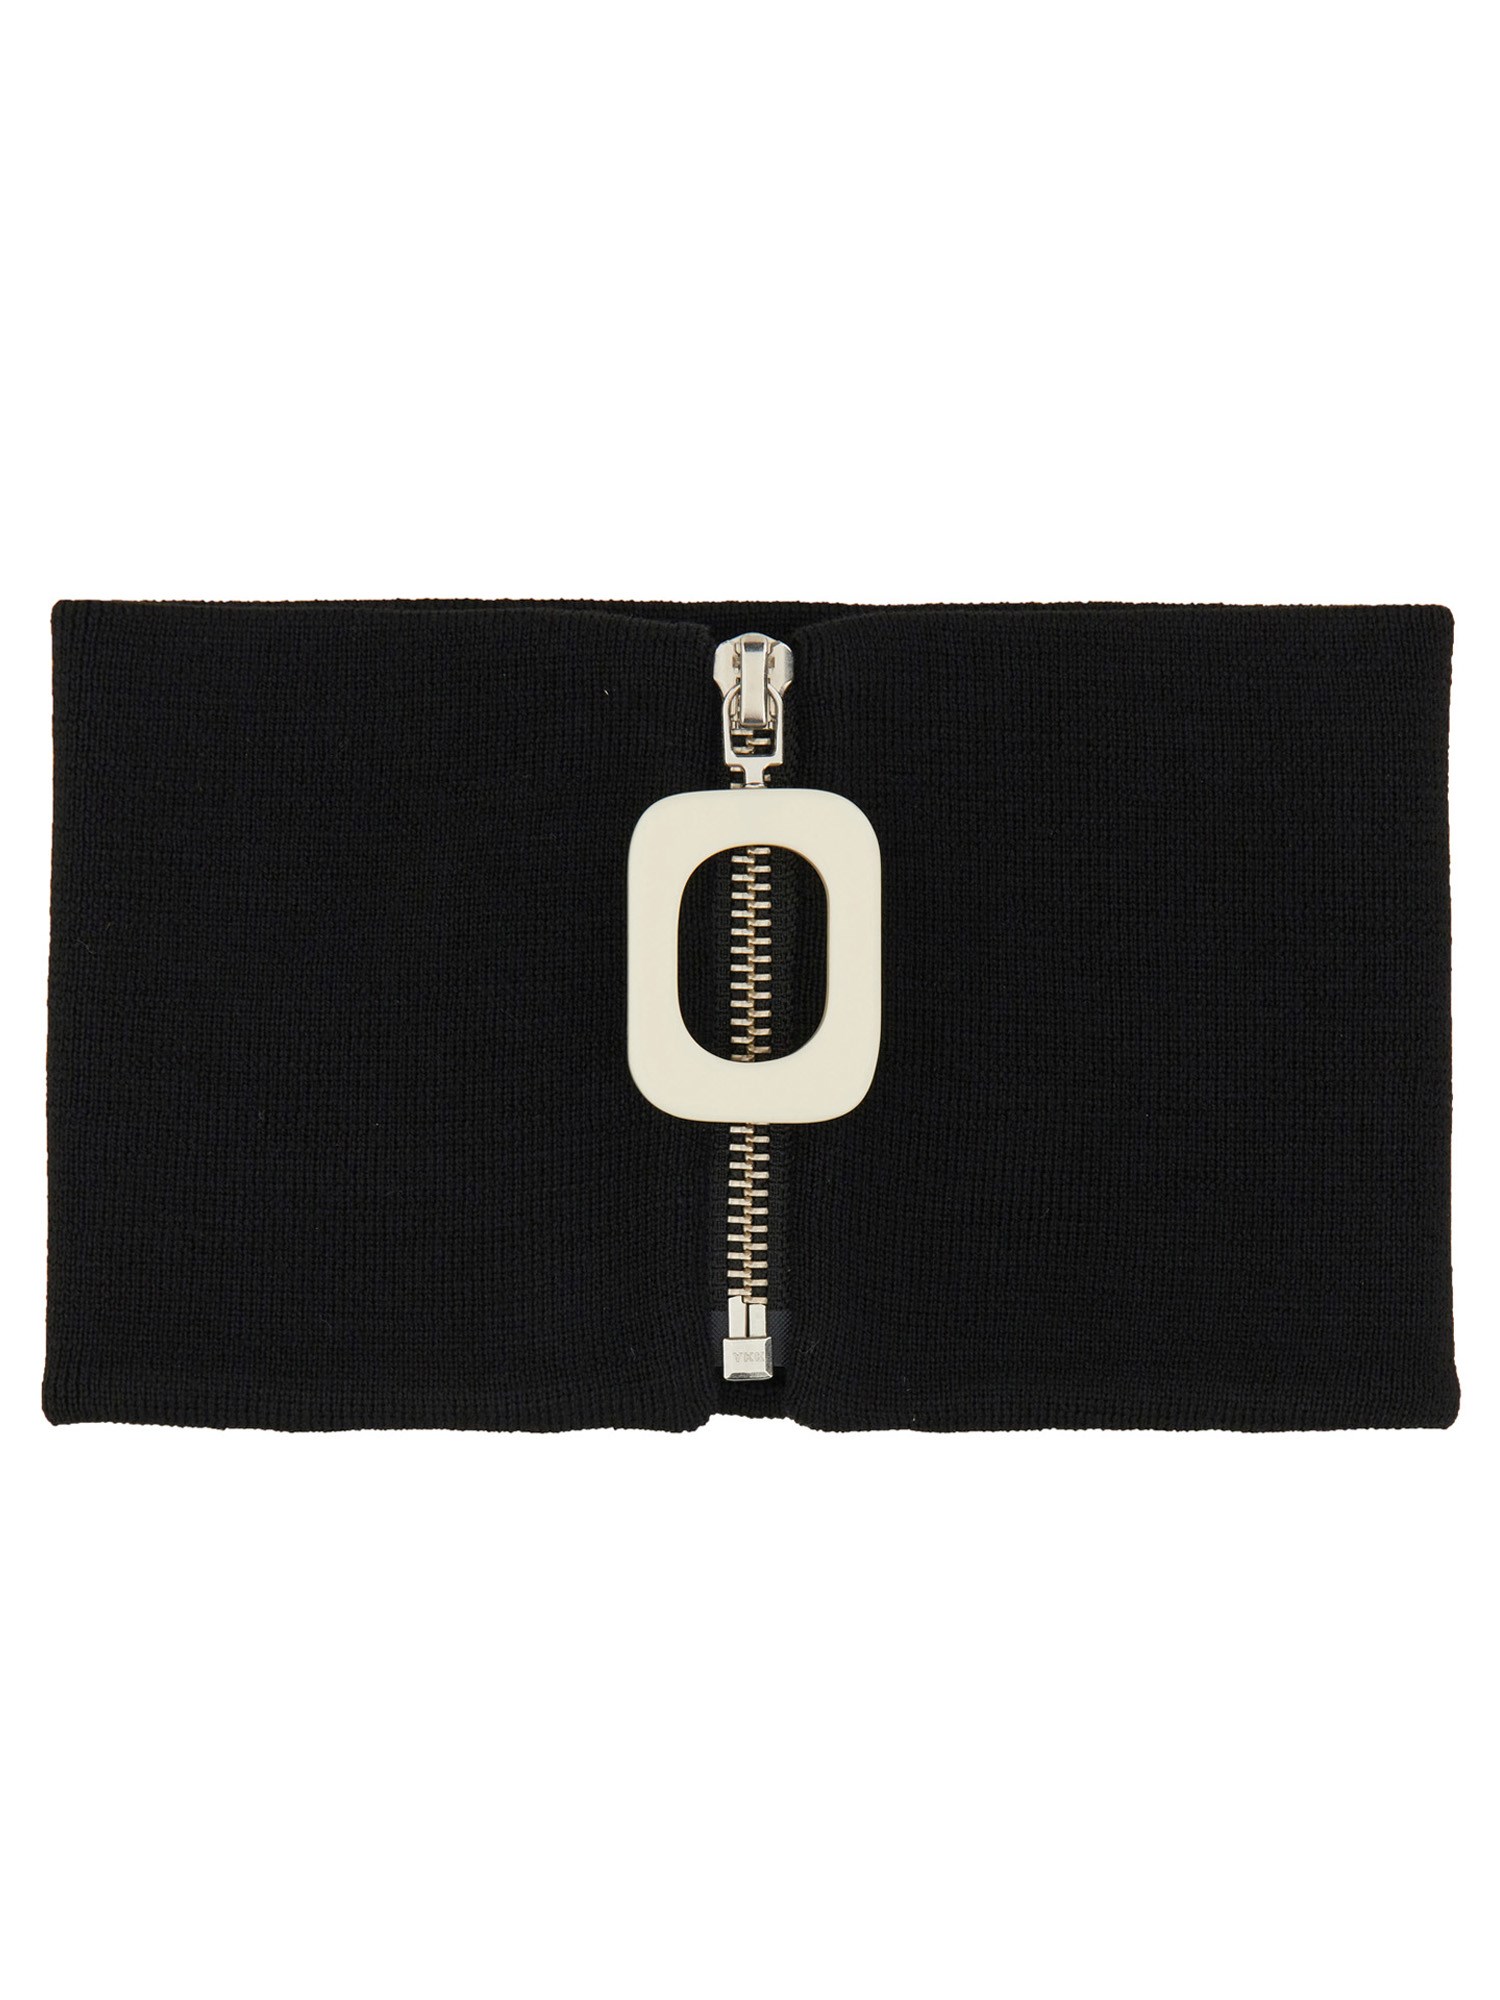 Jw Anderson jw anderson neck warmer with jwa puller